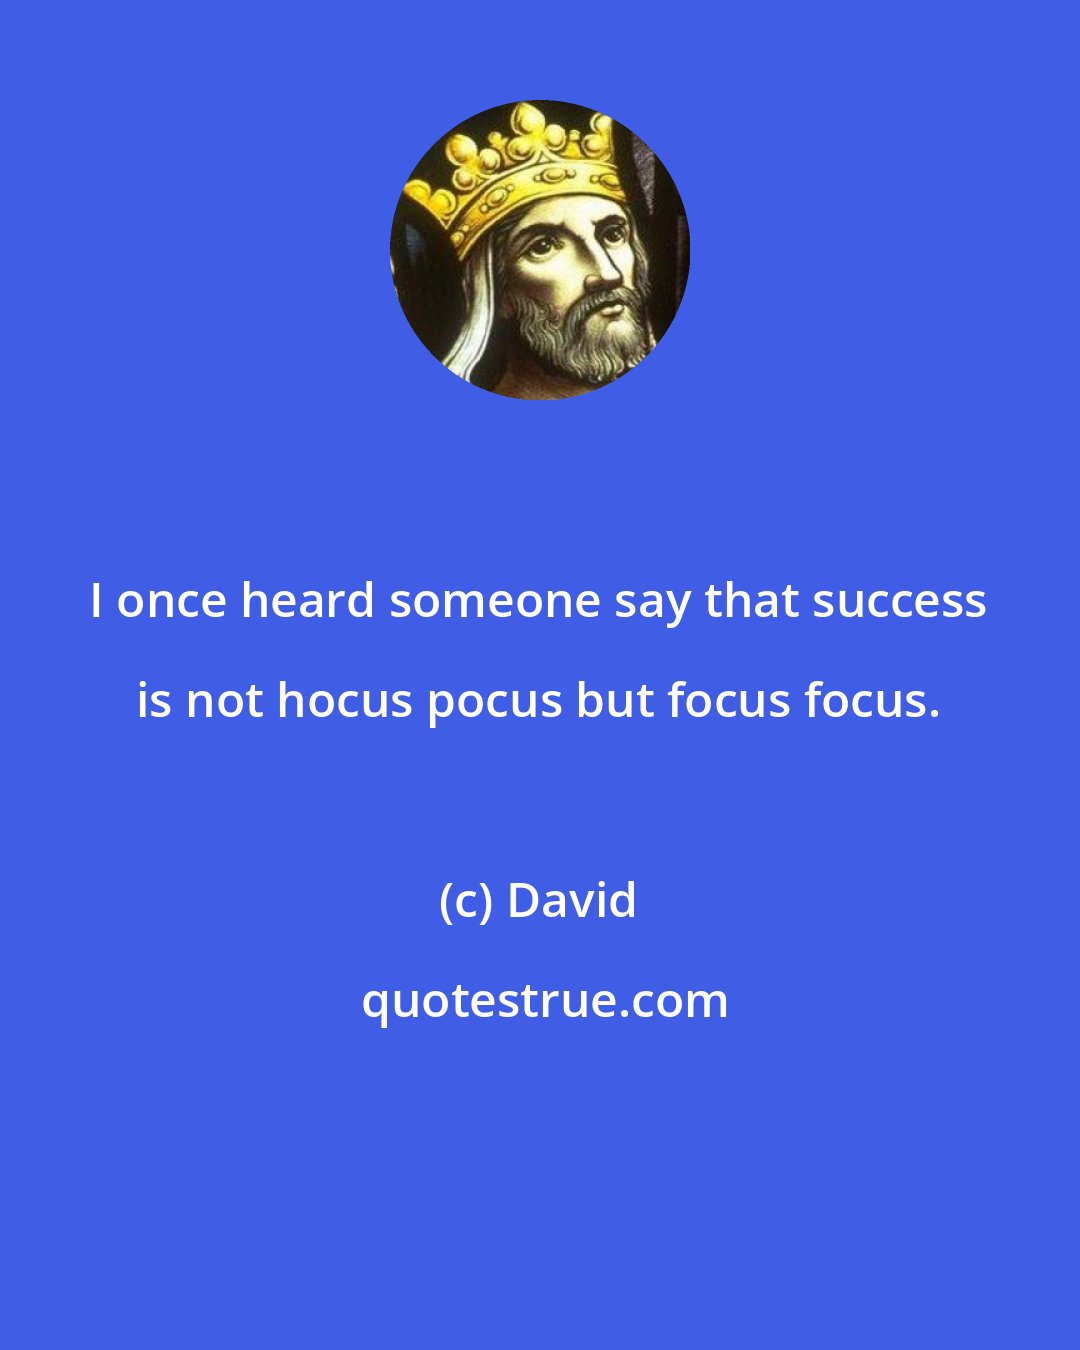 David: I once heard someone say that success is not hocus pocus but focus focus.